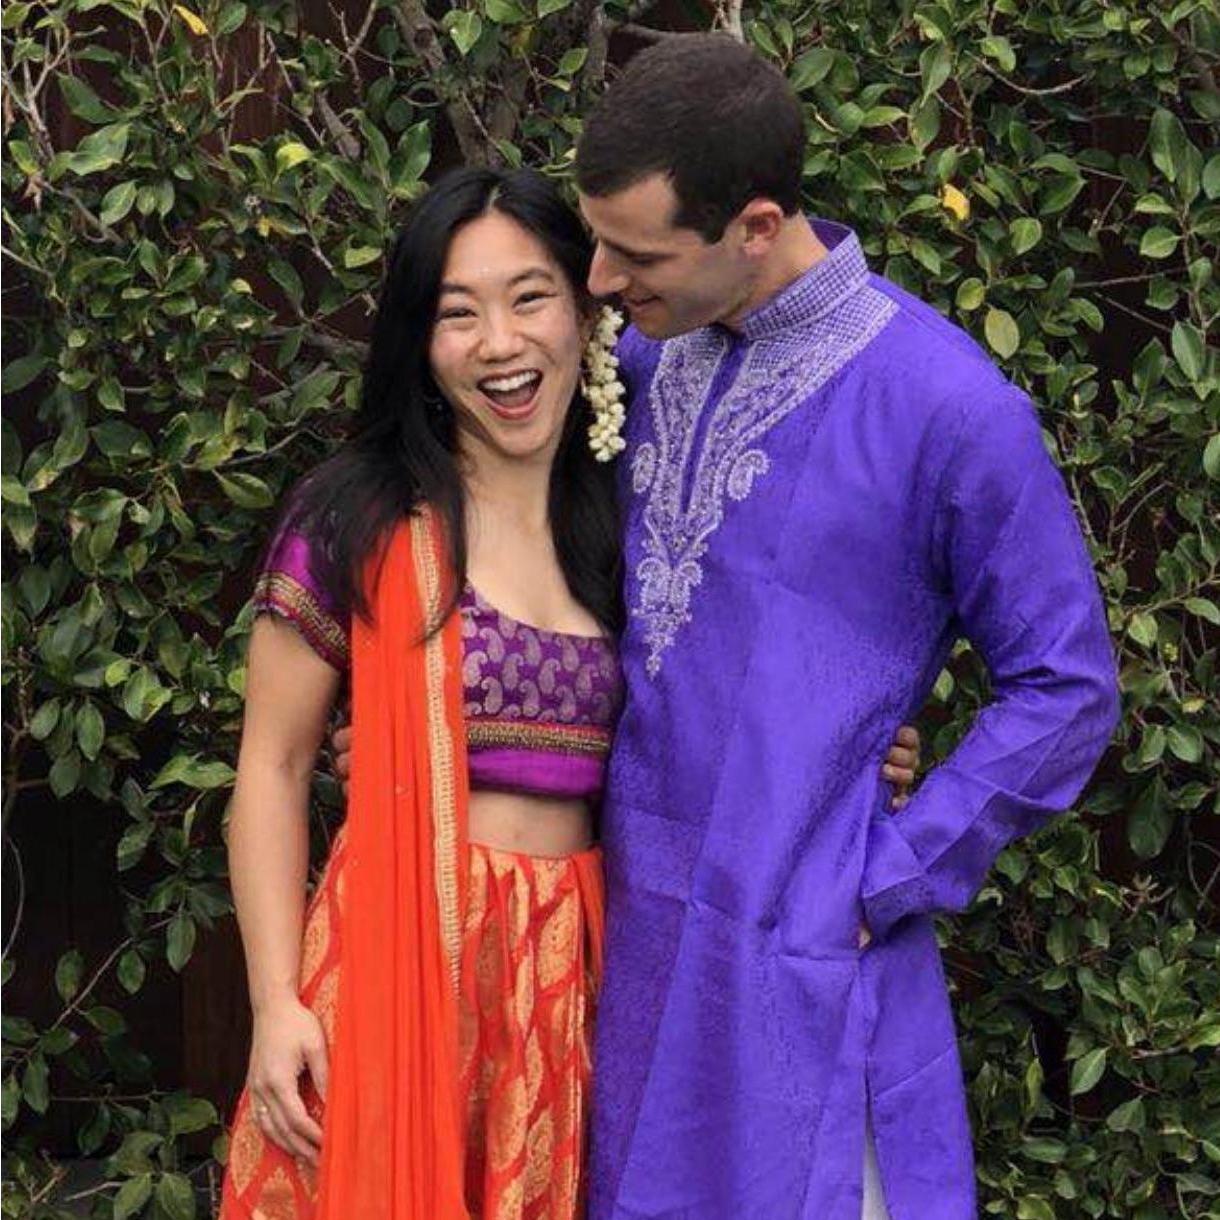 Dress up and dance!
(Our Bollywood premier at N+A’s wedding, Newport Beach, CA.  Photo cred: KK)